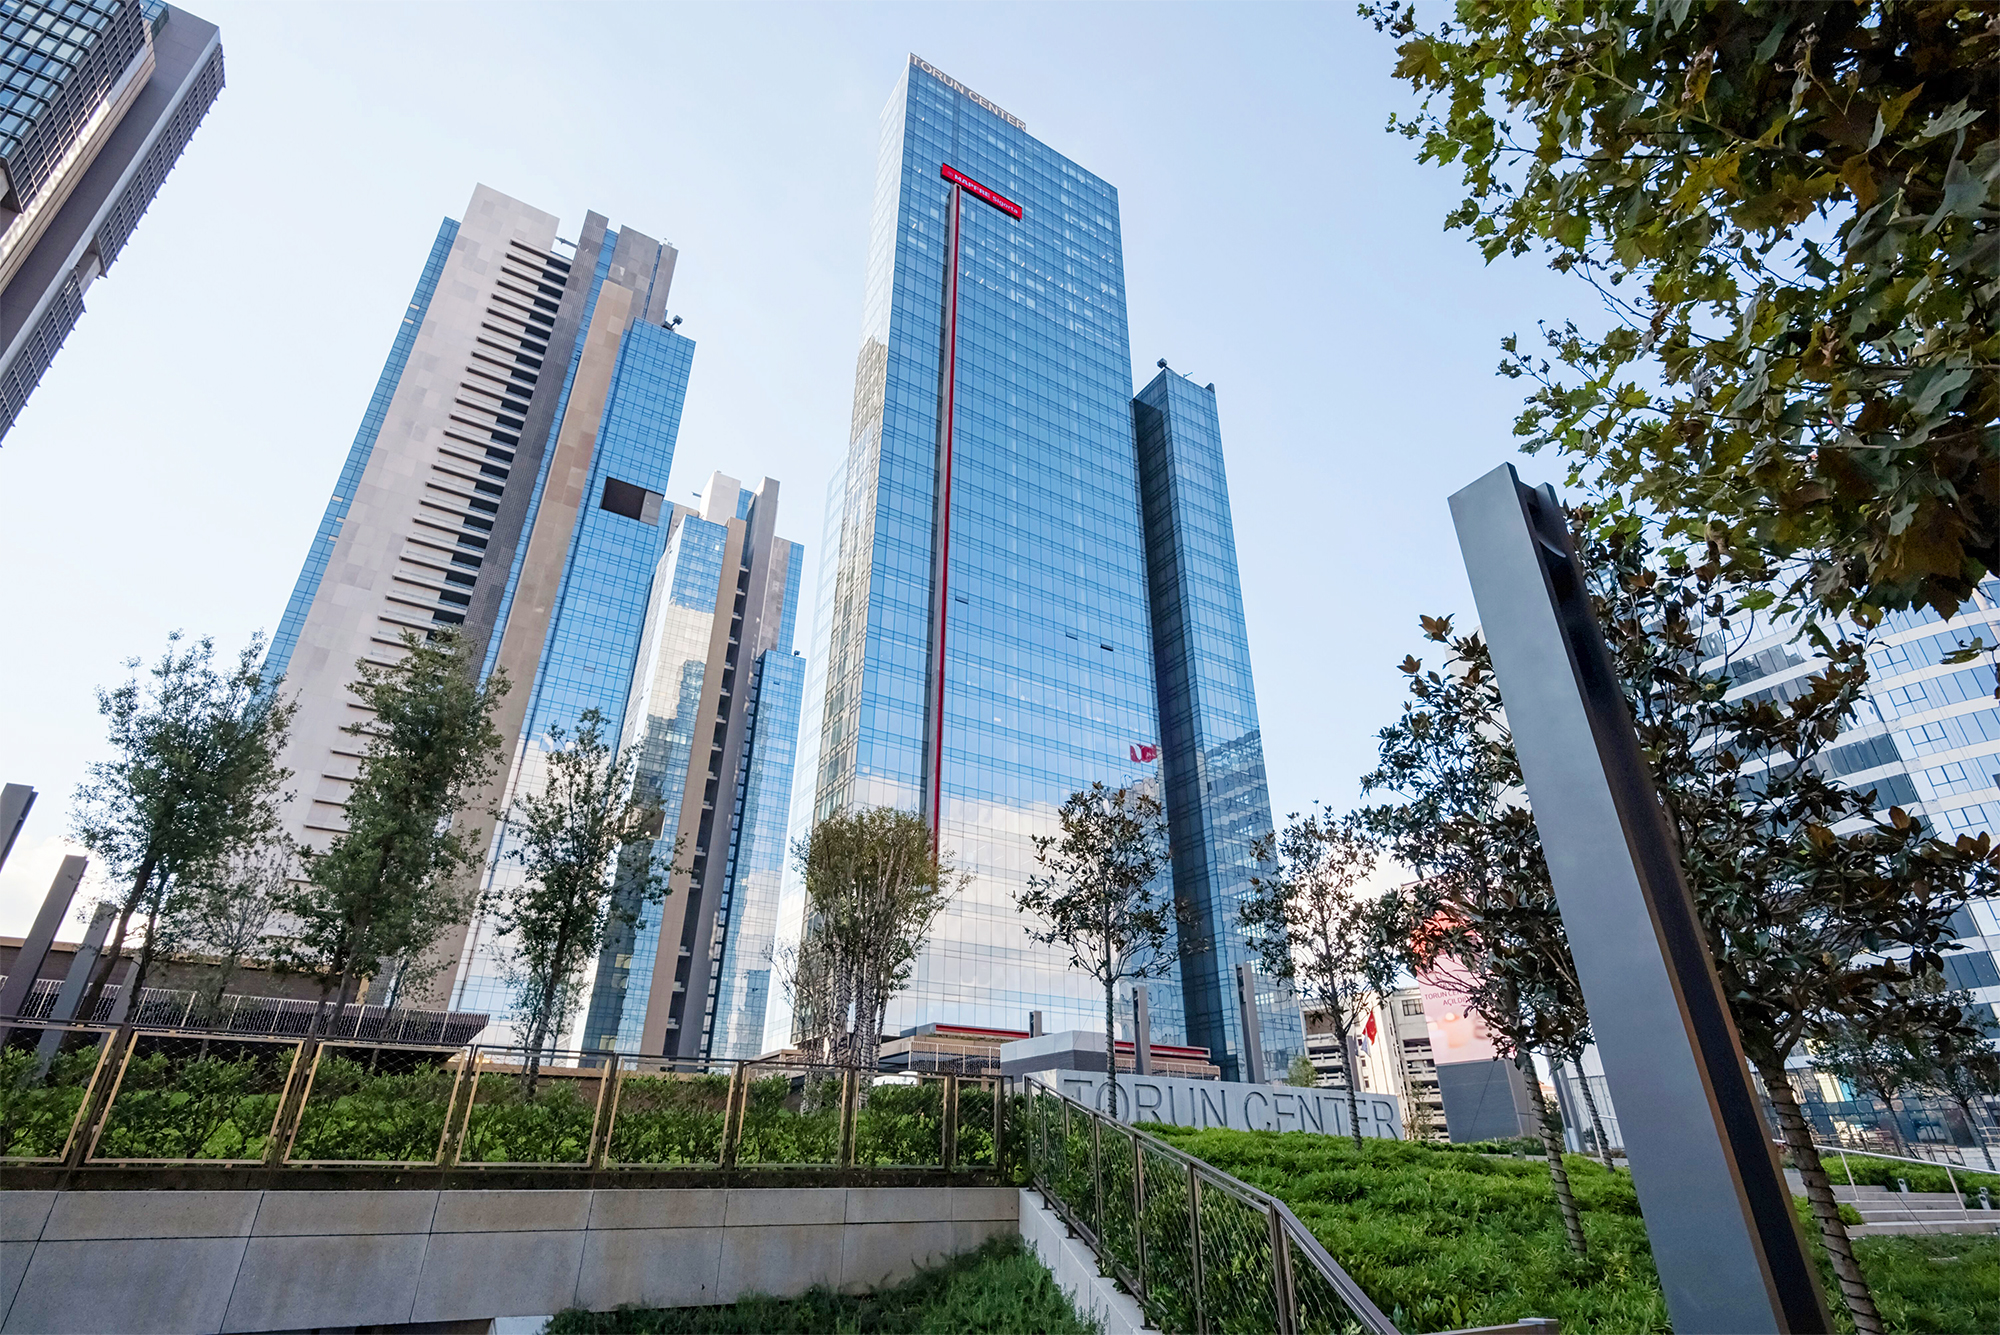 EMBASSY SUITES BY HILTON ENTERS TURKEY FOR THE FIRST TIME WITH TORUN CENTER